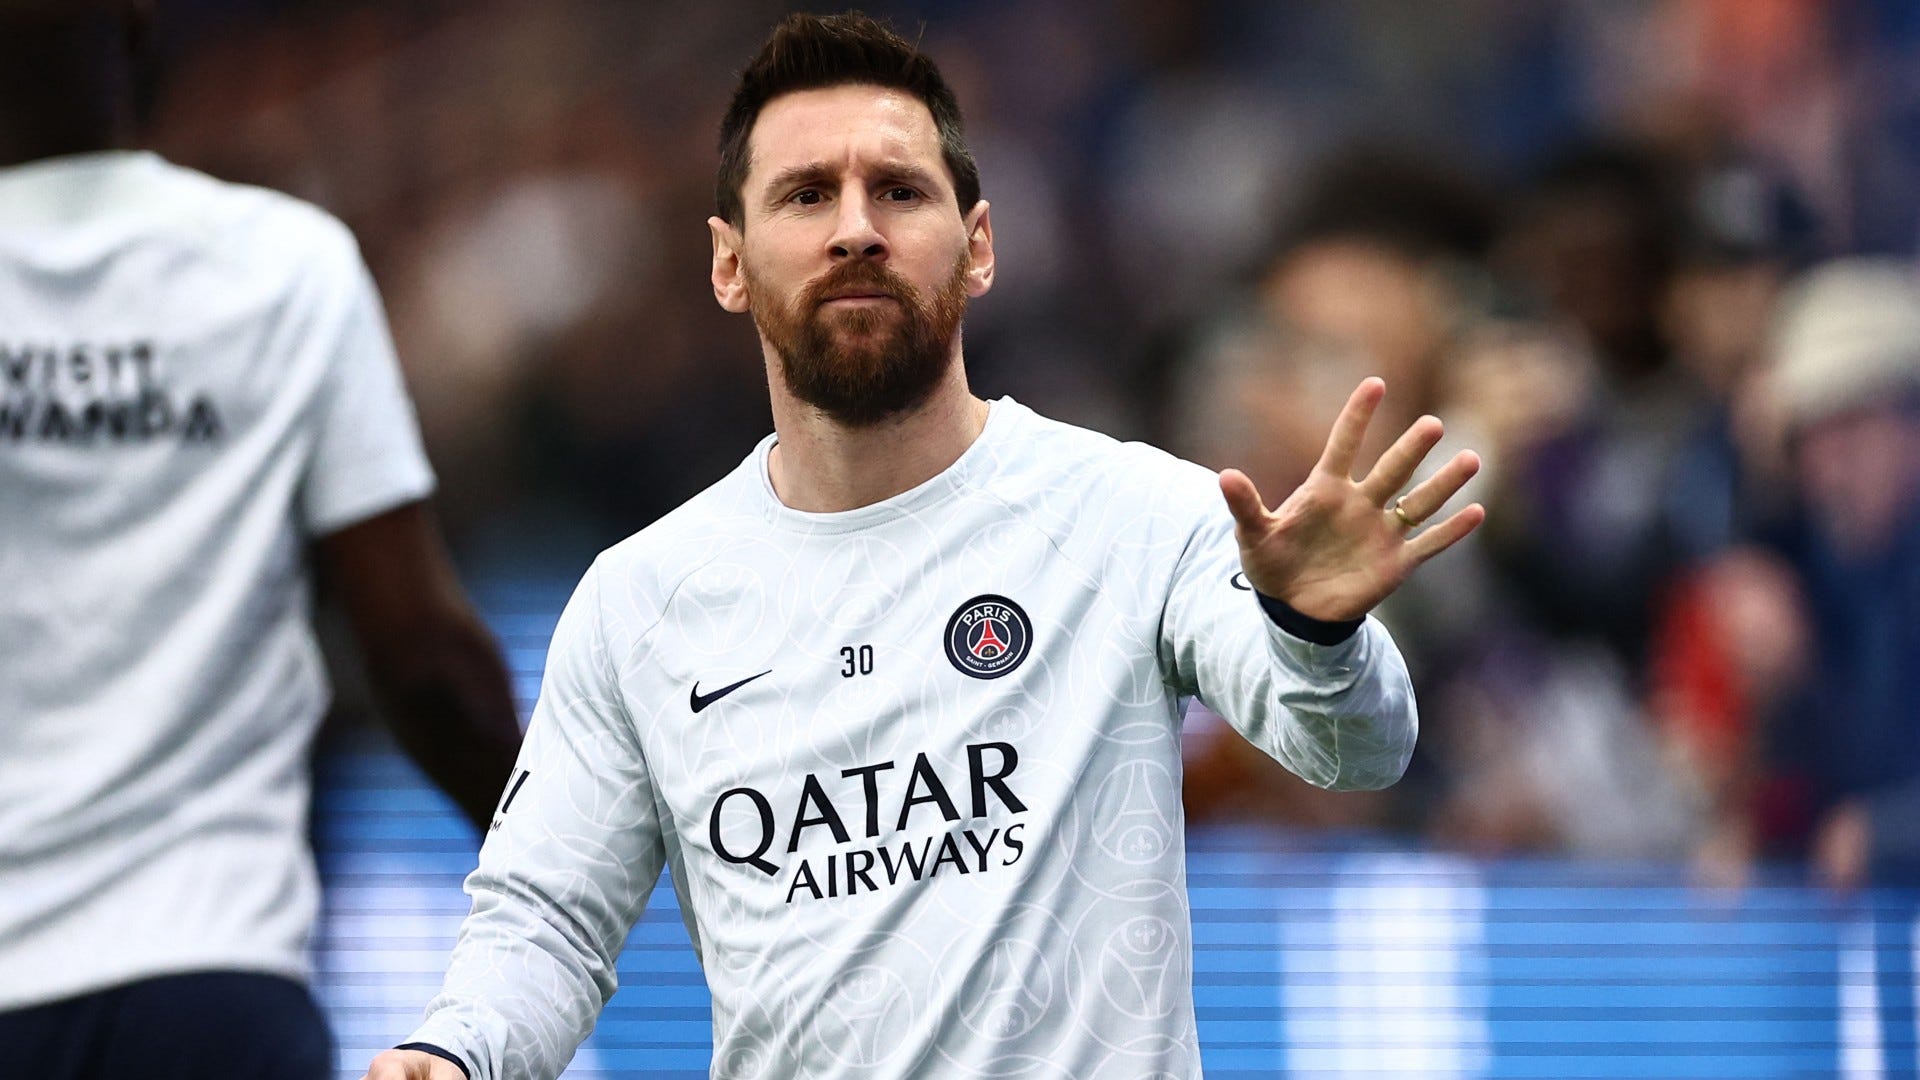 'A wonderful experience' - Lionel Messi bids hollow farewell to PSG as he prepares to make a decision over his future